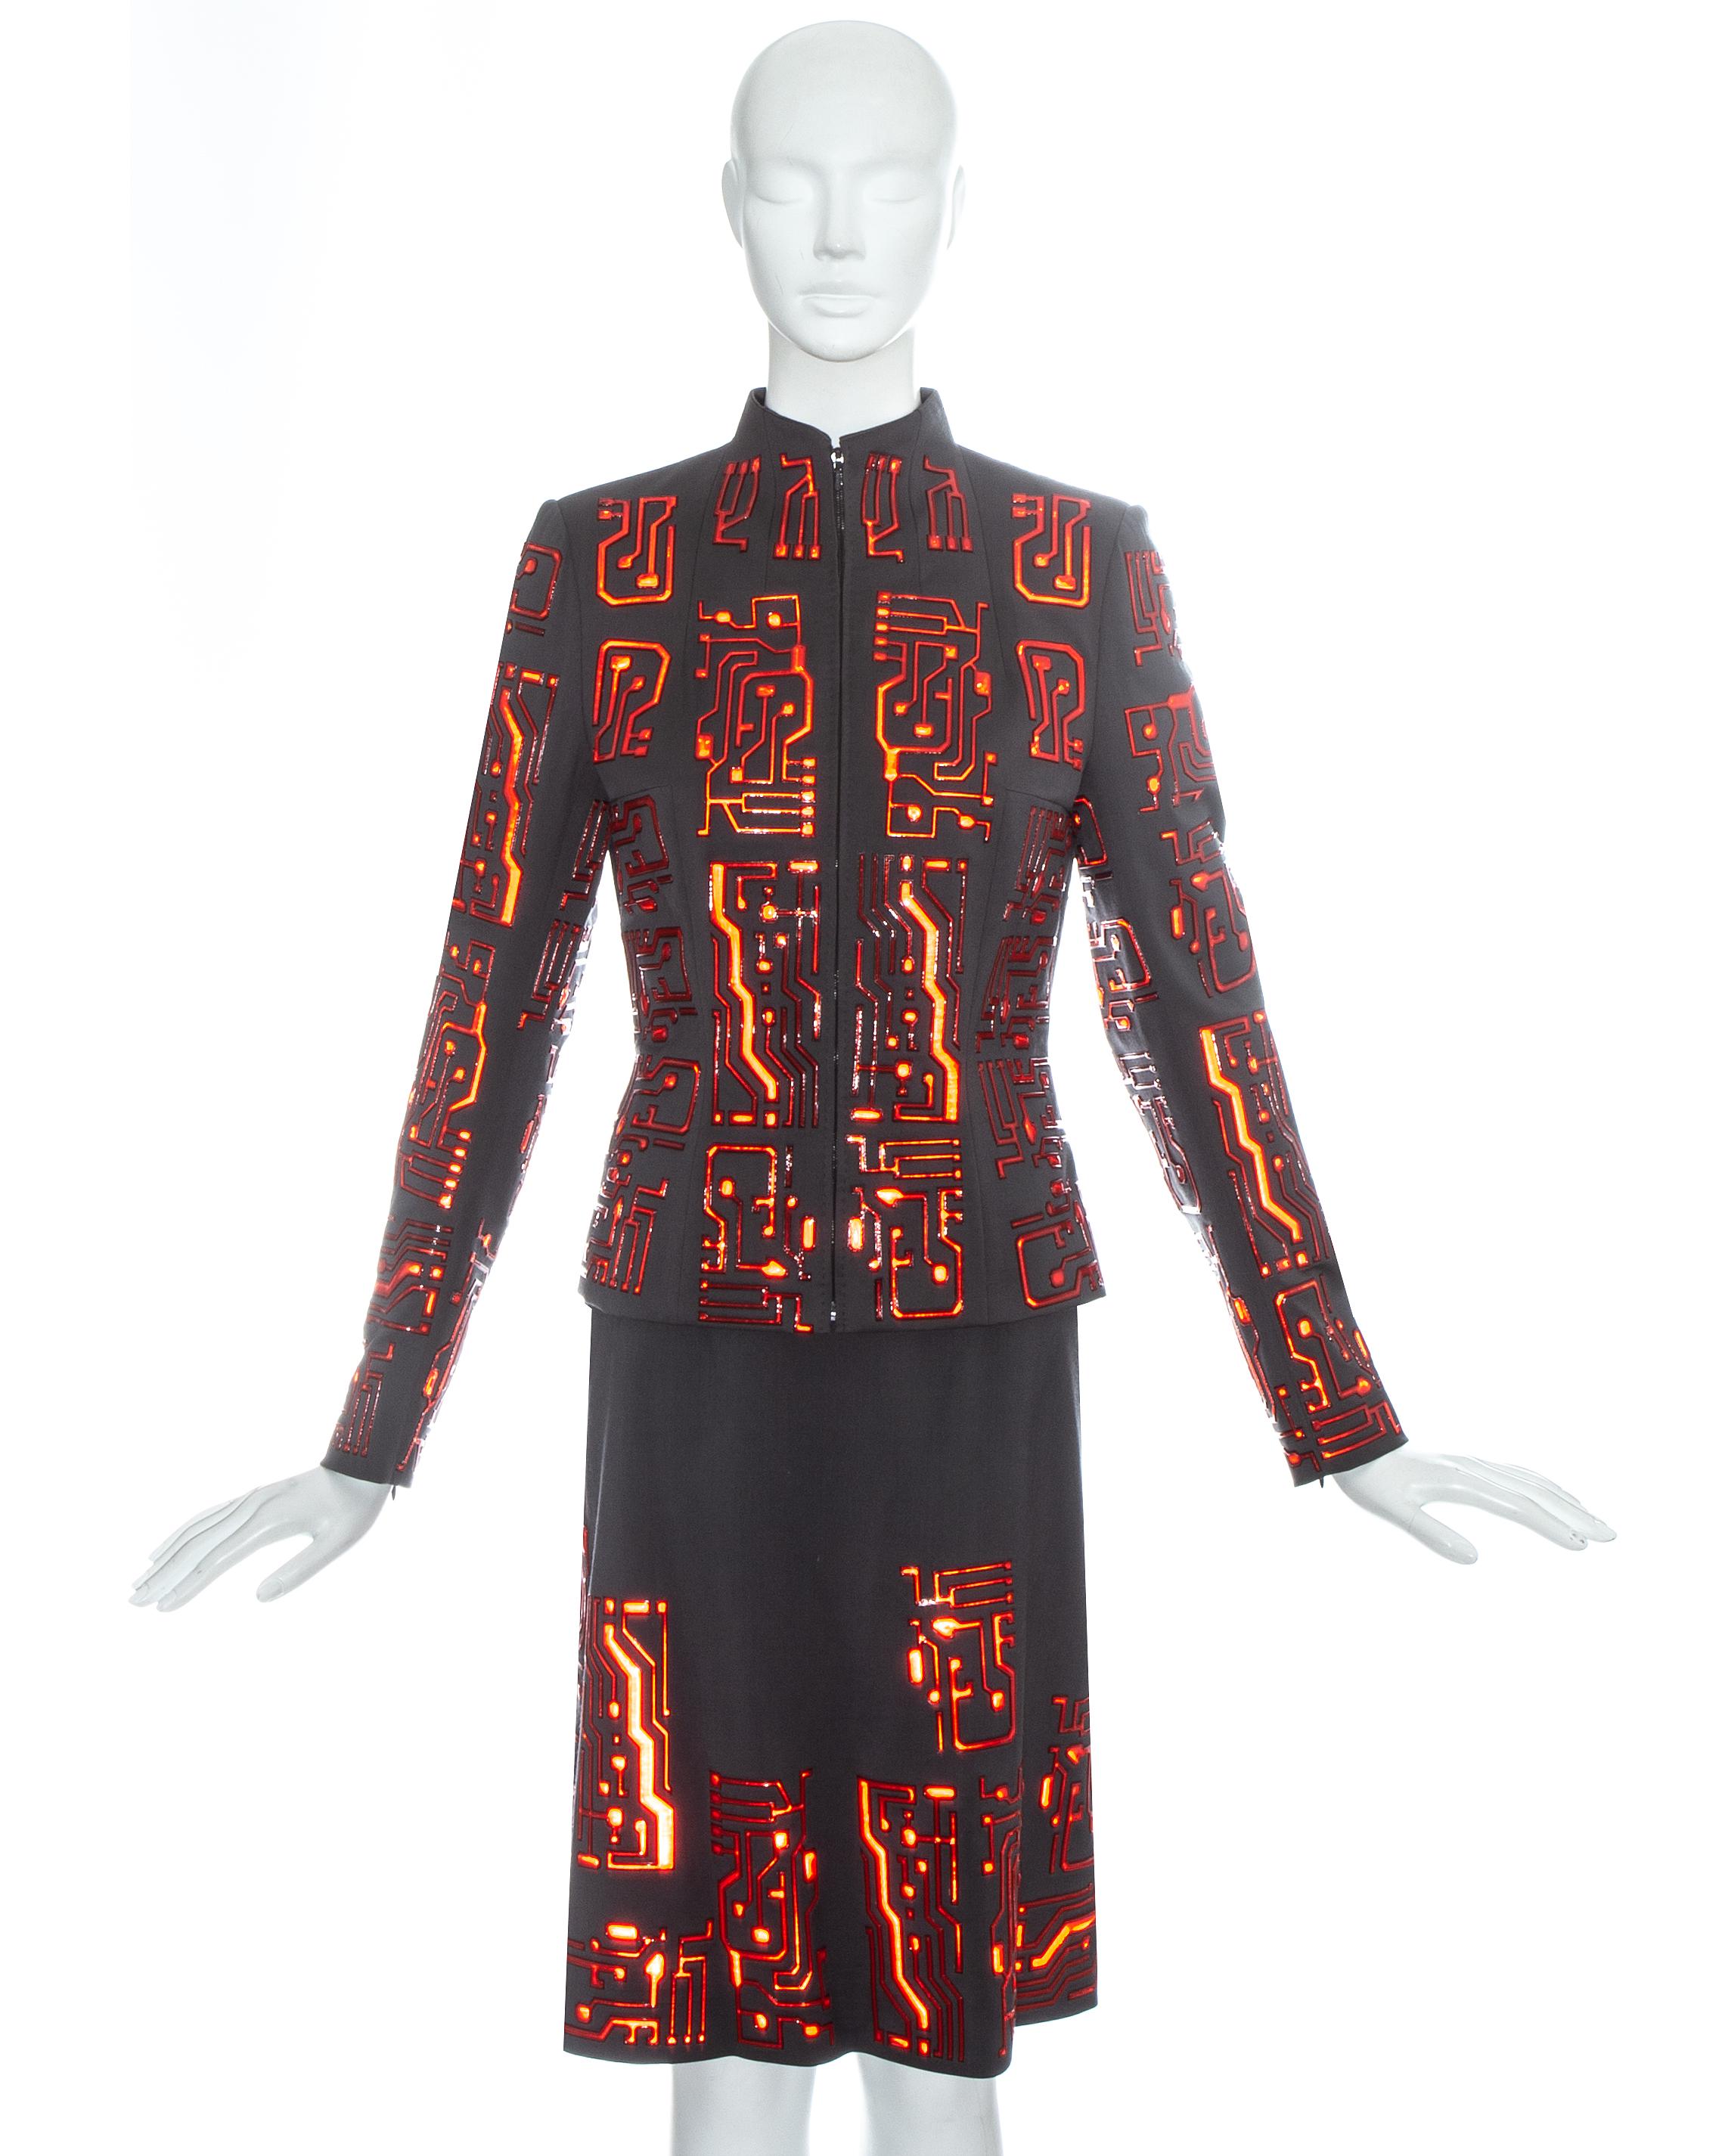 Givenchy by Alexander McQueen; grey wool skirt suit with red reflective plastic appliqués in the form of circuit boards. Zip fastening down centre front, fitted waist and silk lining. 

Fall-Winter 1999